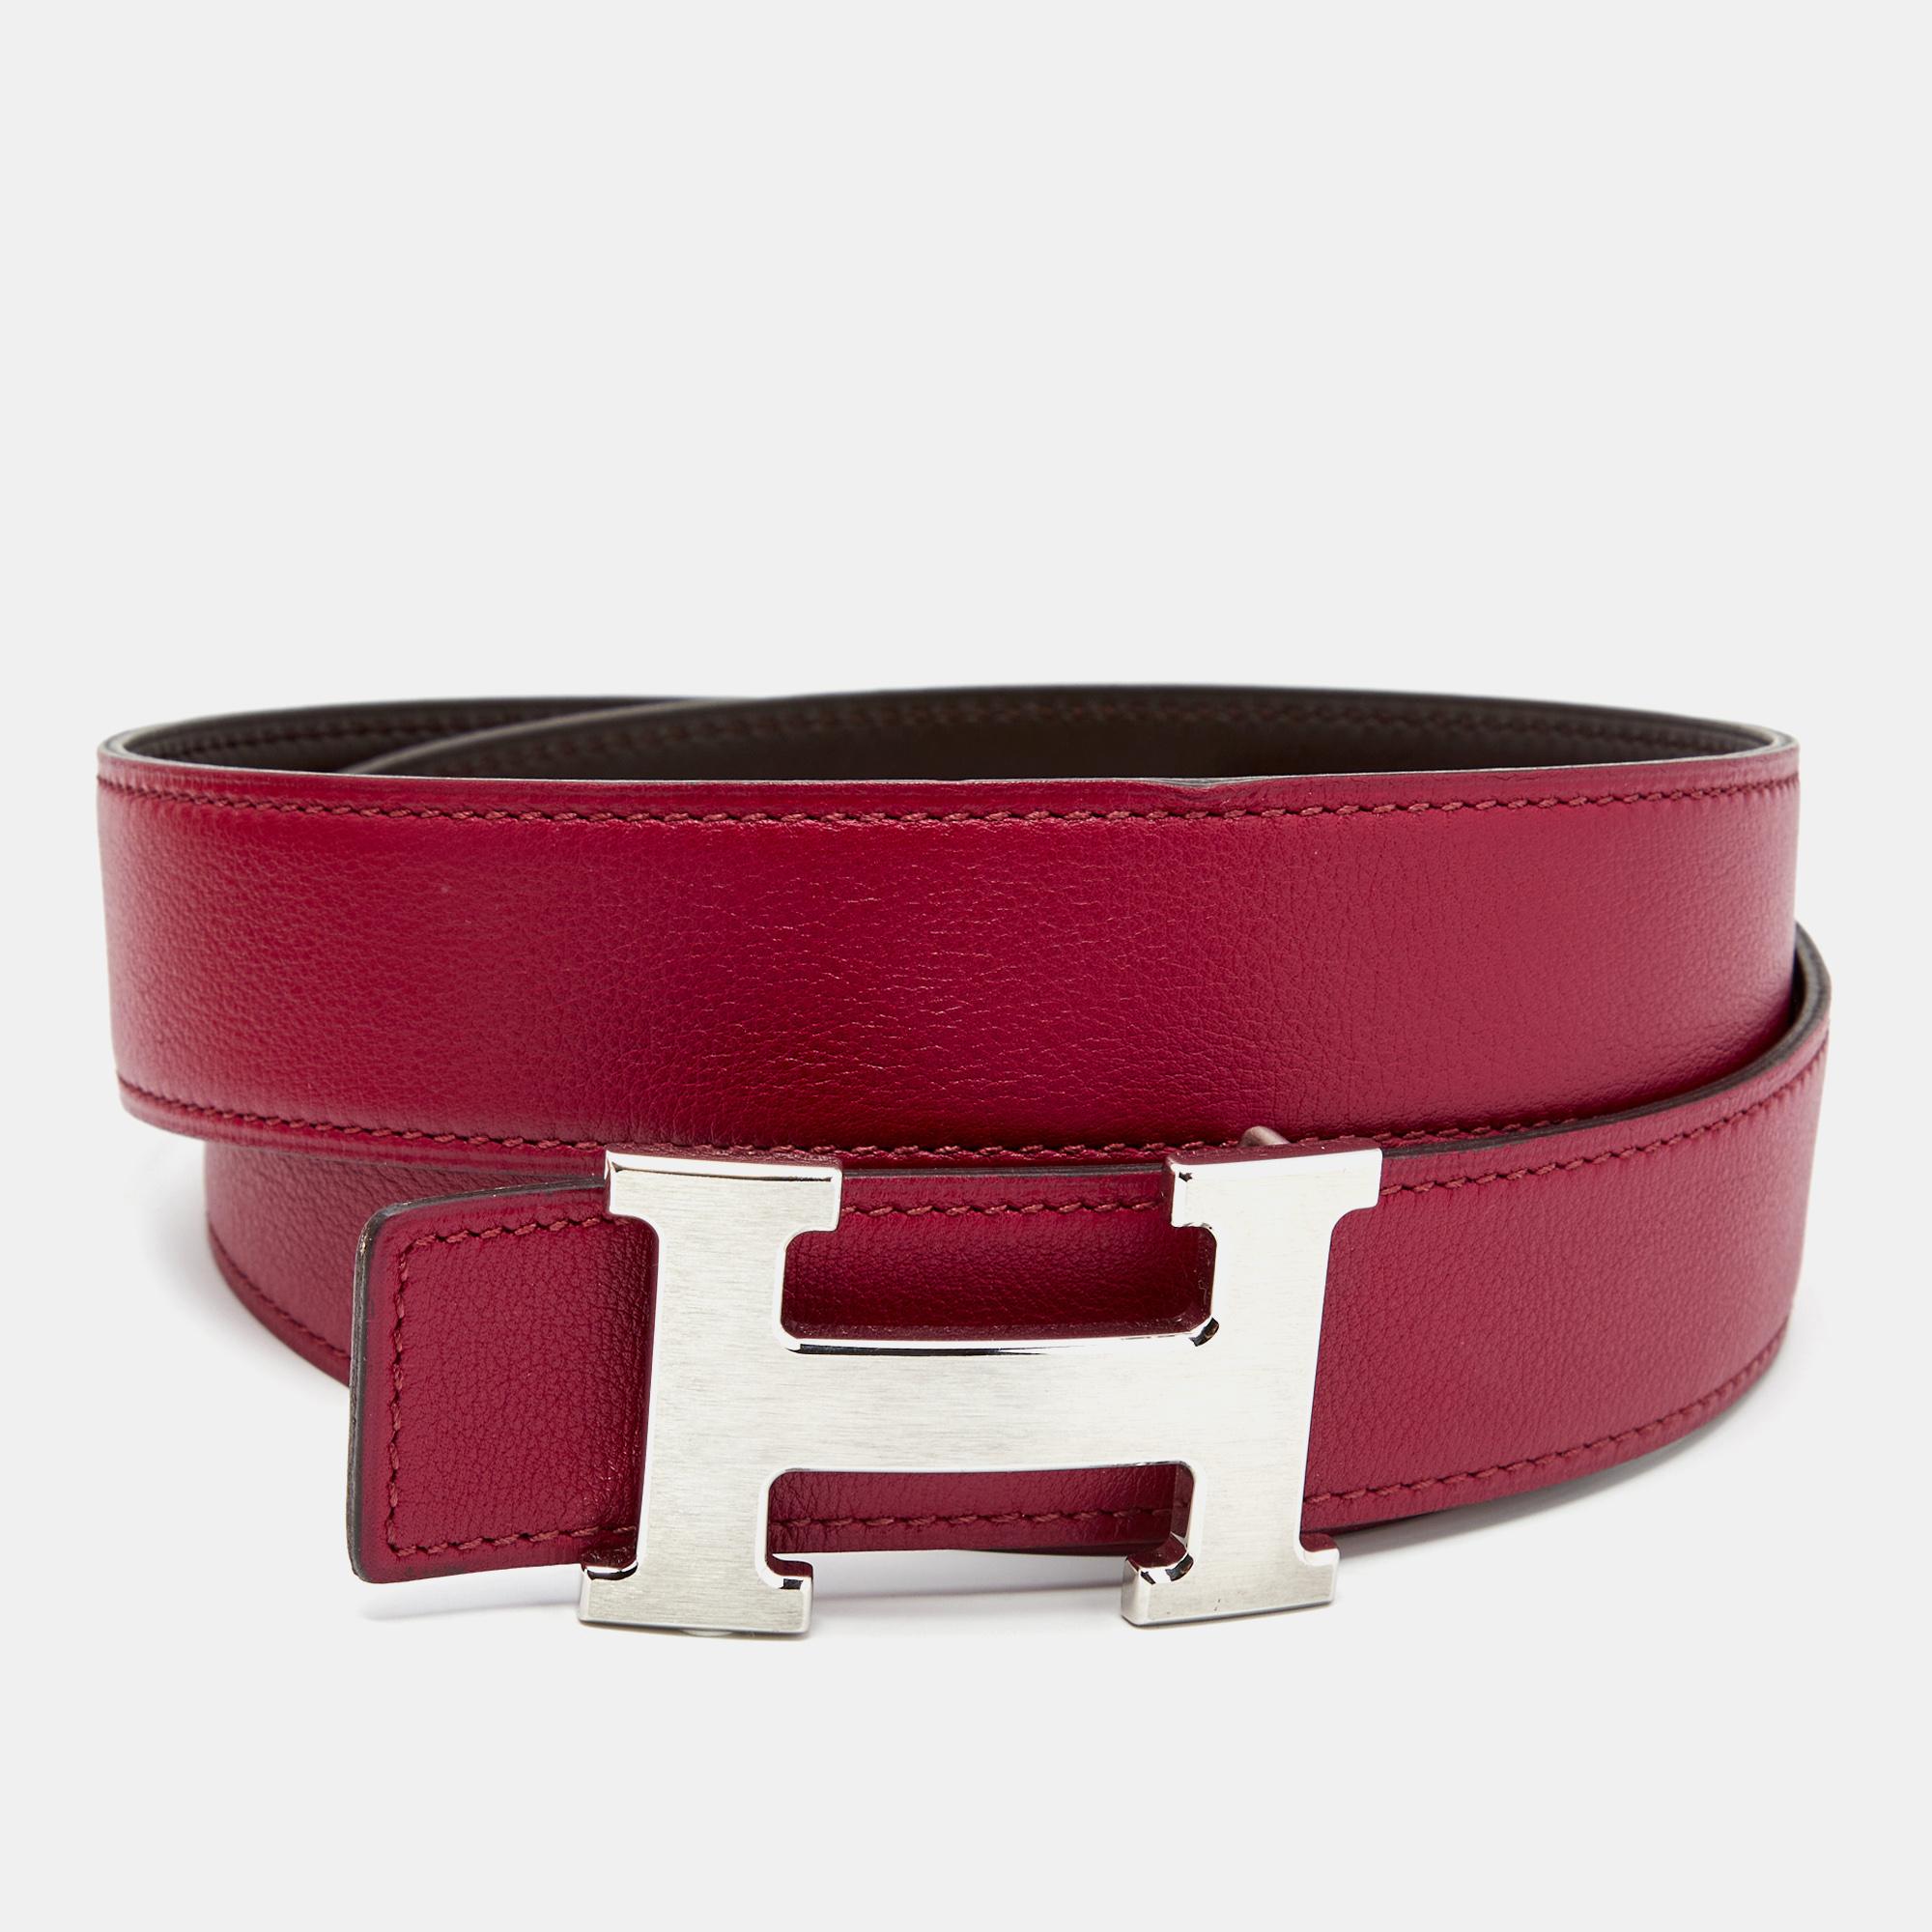 This belt from the House of Hermes will definitely elevate the look of your attire. It is created using Chocolat/Tosca Swift and Evergrain leather, which is embellished with an H buckle motif on the front. Elevated with silver-tone hardware, this